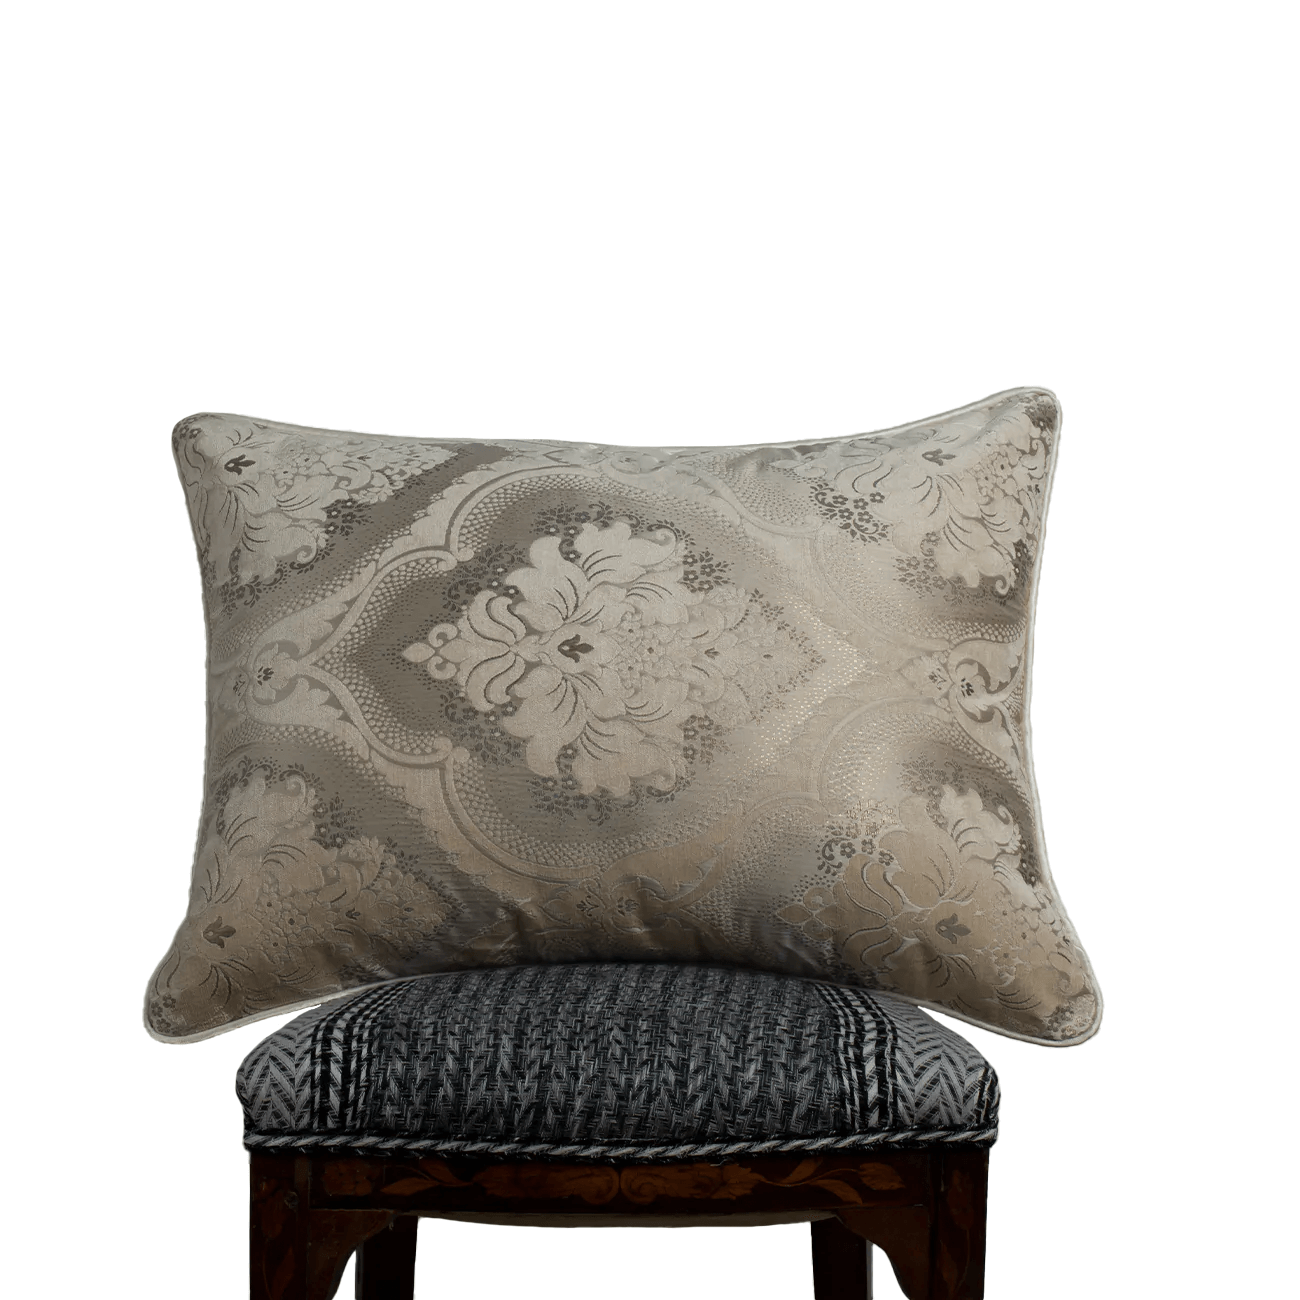 Coco Damask Pillow